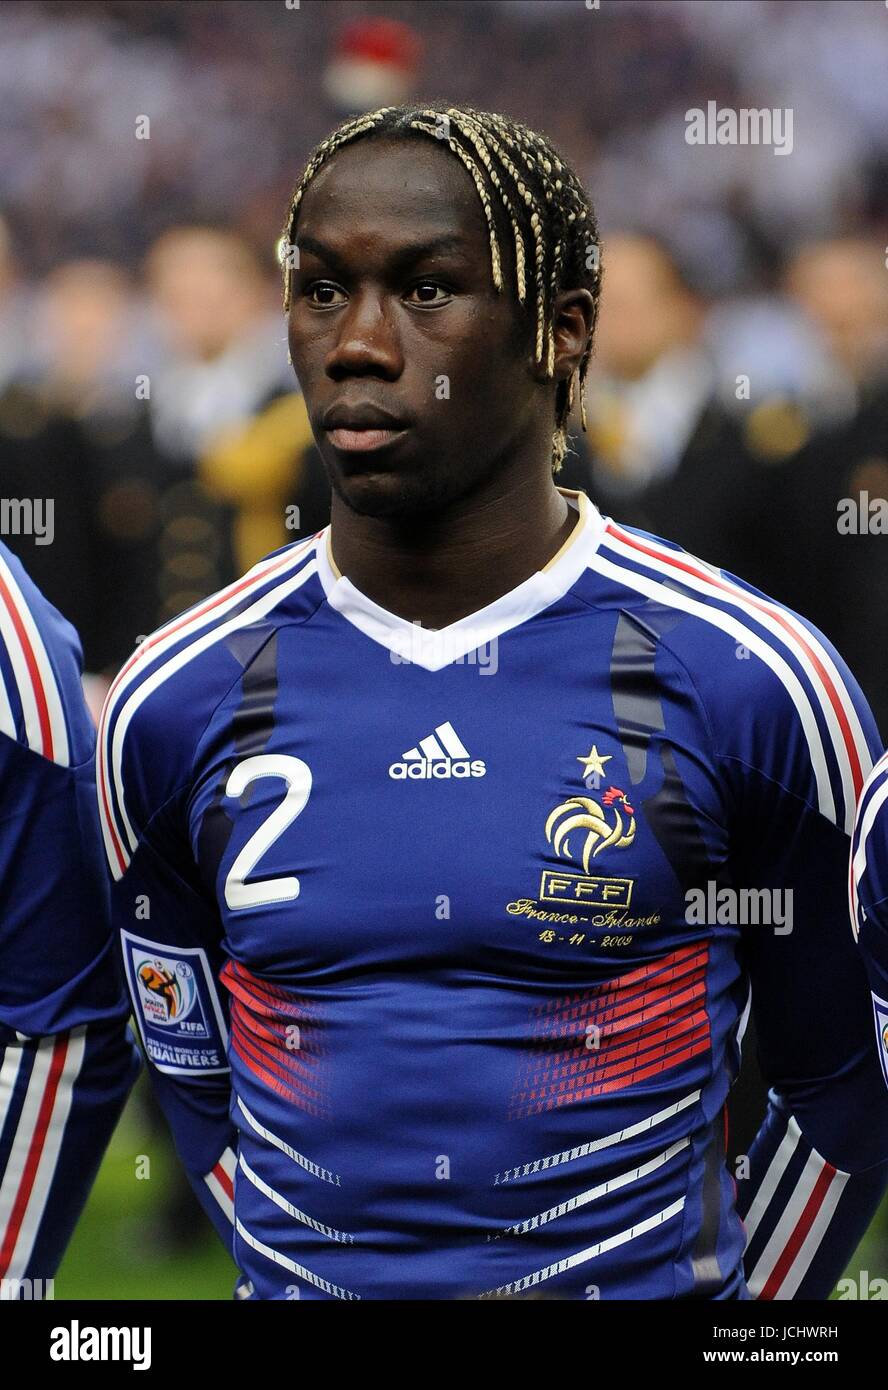 BACARY SAGNA FRANCE & ARSENAL FRANCE V REPUBLIC OF IRELAND STADE DE FRANCE, PARIS, FRANCE 18 November 2009 GAB4306     WARNING! This Photograph May Only Be Used For Newspaper And/Or Magazine Editorial Purposes. May Not Be Used For, Internet/Online Usage Nor For Publications Involving 1 player, 1 Club Or 1 Competition, Without Written Authorisation From Football DataCo Ltd. For Any Queries, Please Contact Football DataCo Ltd on +44 (0) 207 864 9121 Stock Photo